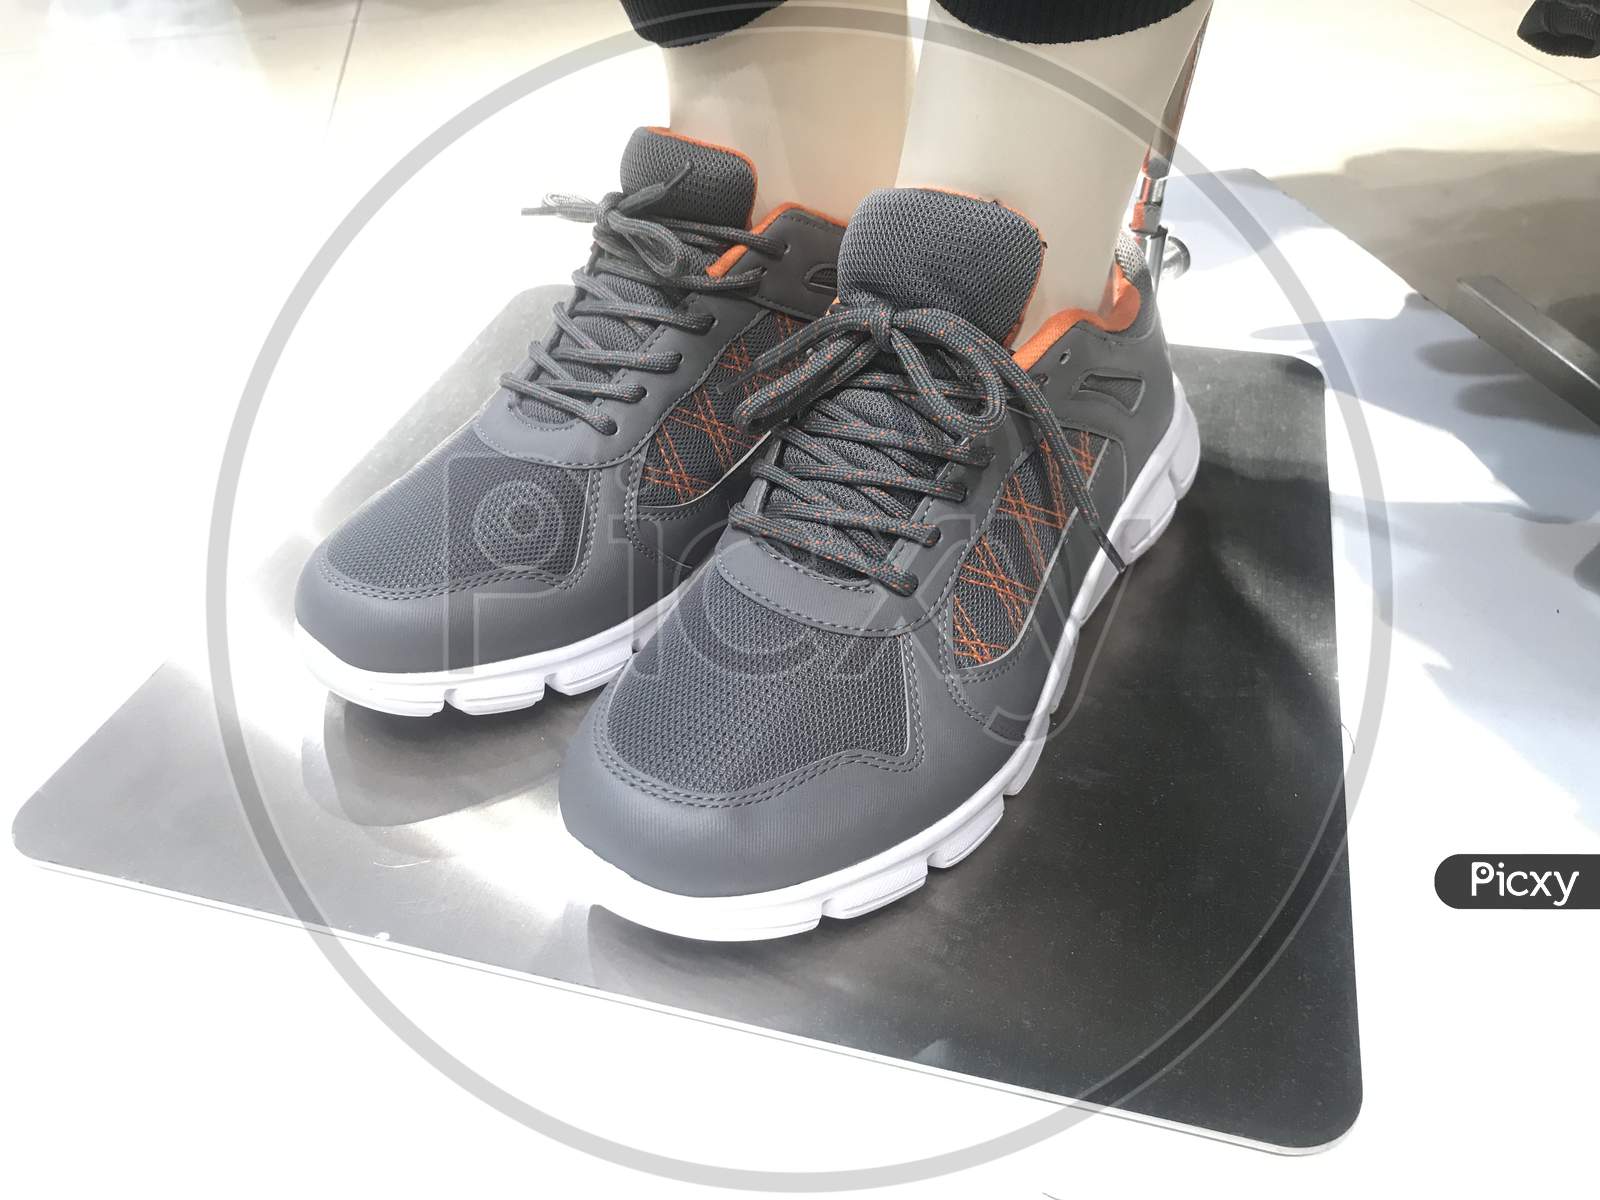 Grey Color Pair Of Sneakers Wore By A Garments Toy For Demo On A Stainless Steel And Fixed Rigid For Marketing Of Sports Shoes For Athletes